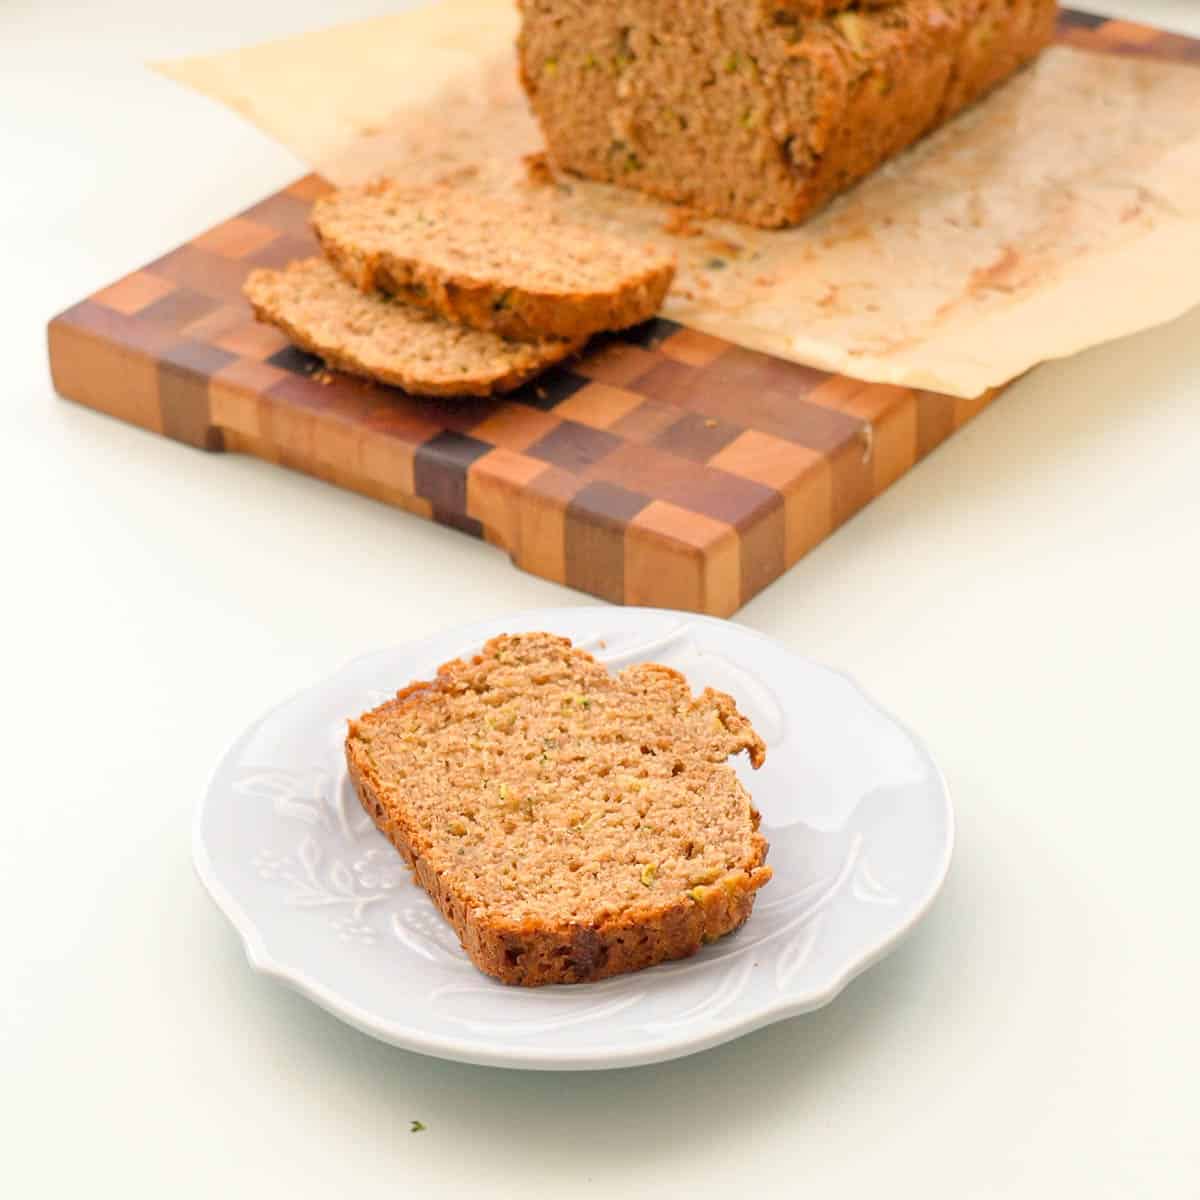 A slice of banana bread on a patterned side plate. 